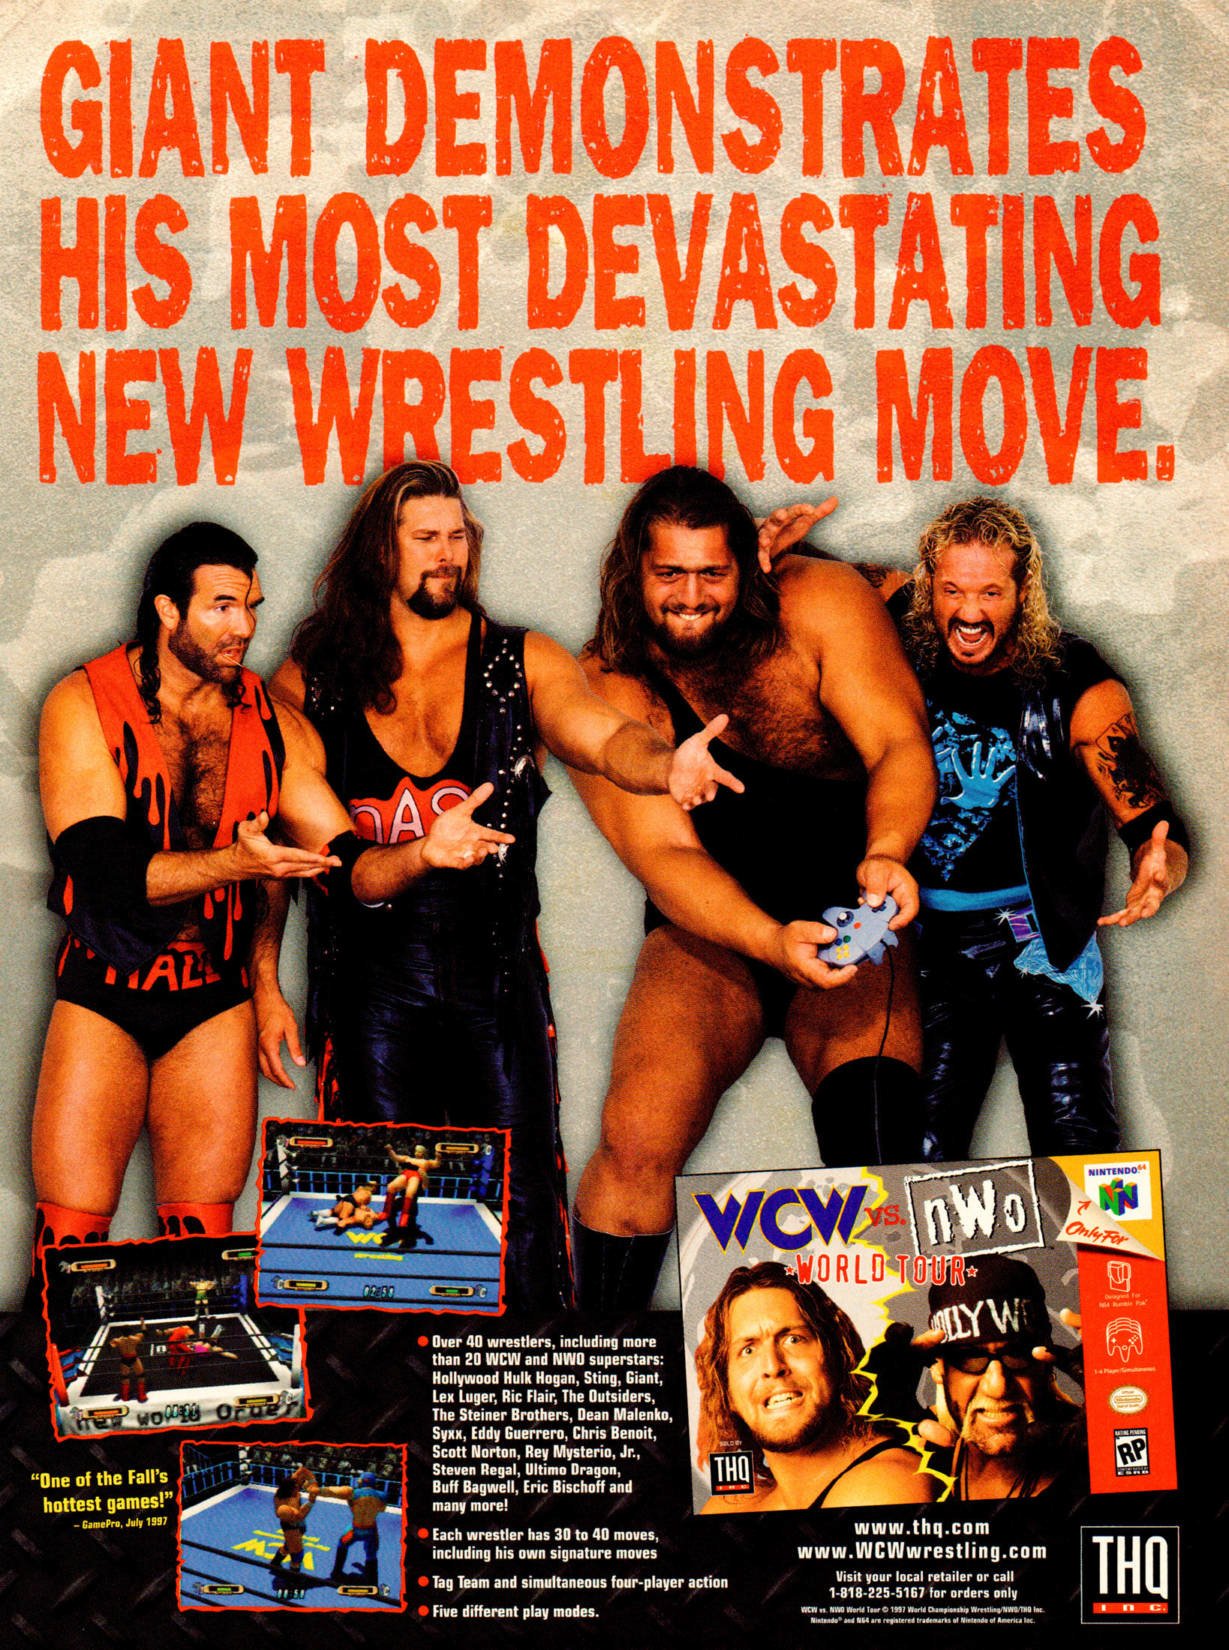 90s video game ads -  wcw nwo world tour - Giant Demonstrates His Most Devastating New Wrestling Move. "the fals best games Padri 18 wewhers, includ 20 Chauperatur Ding Dan The Sty S The M lashes 30 Wcw Wo World O Tho Yw 017 Thq Hom